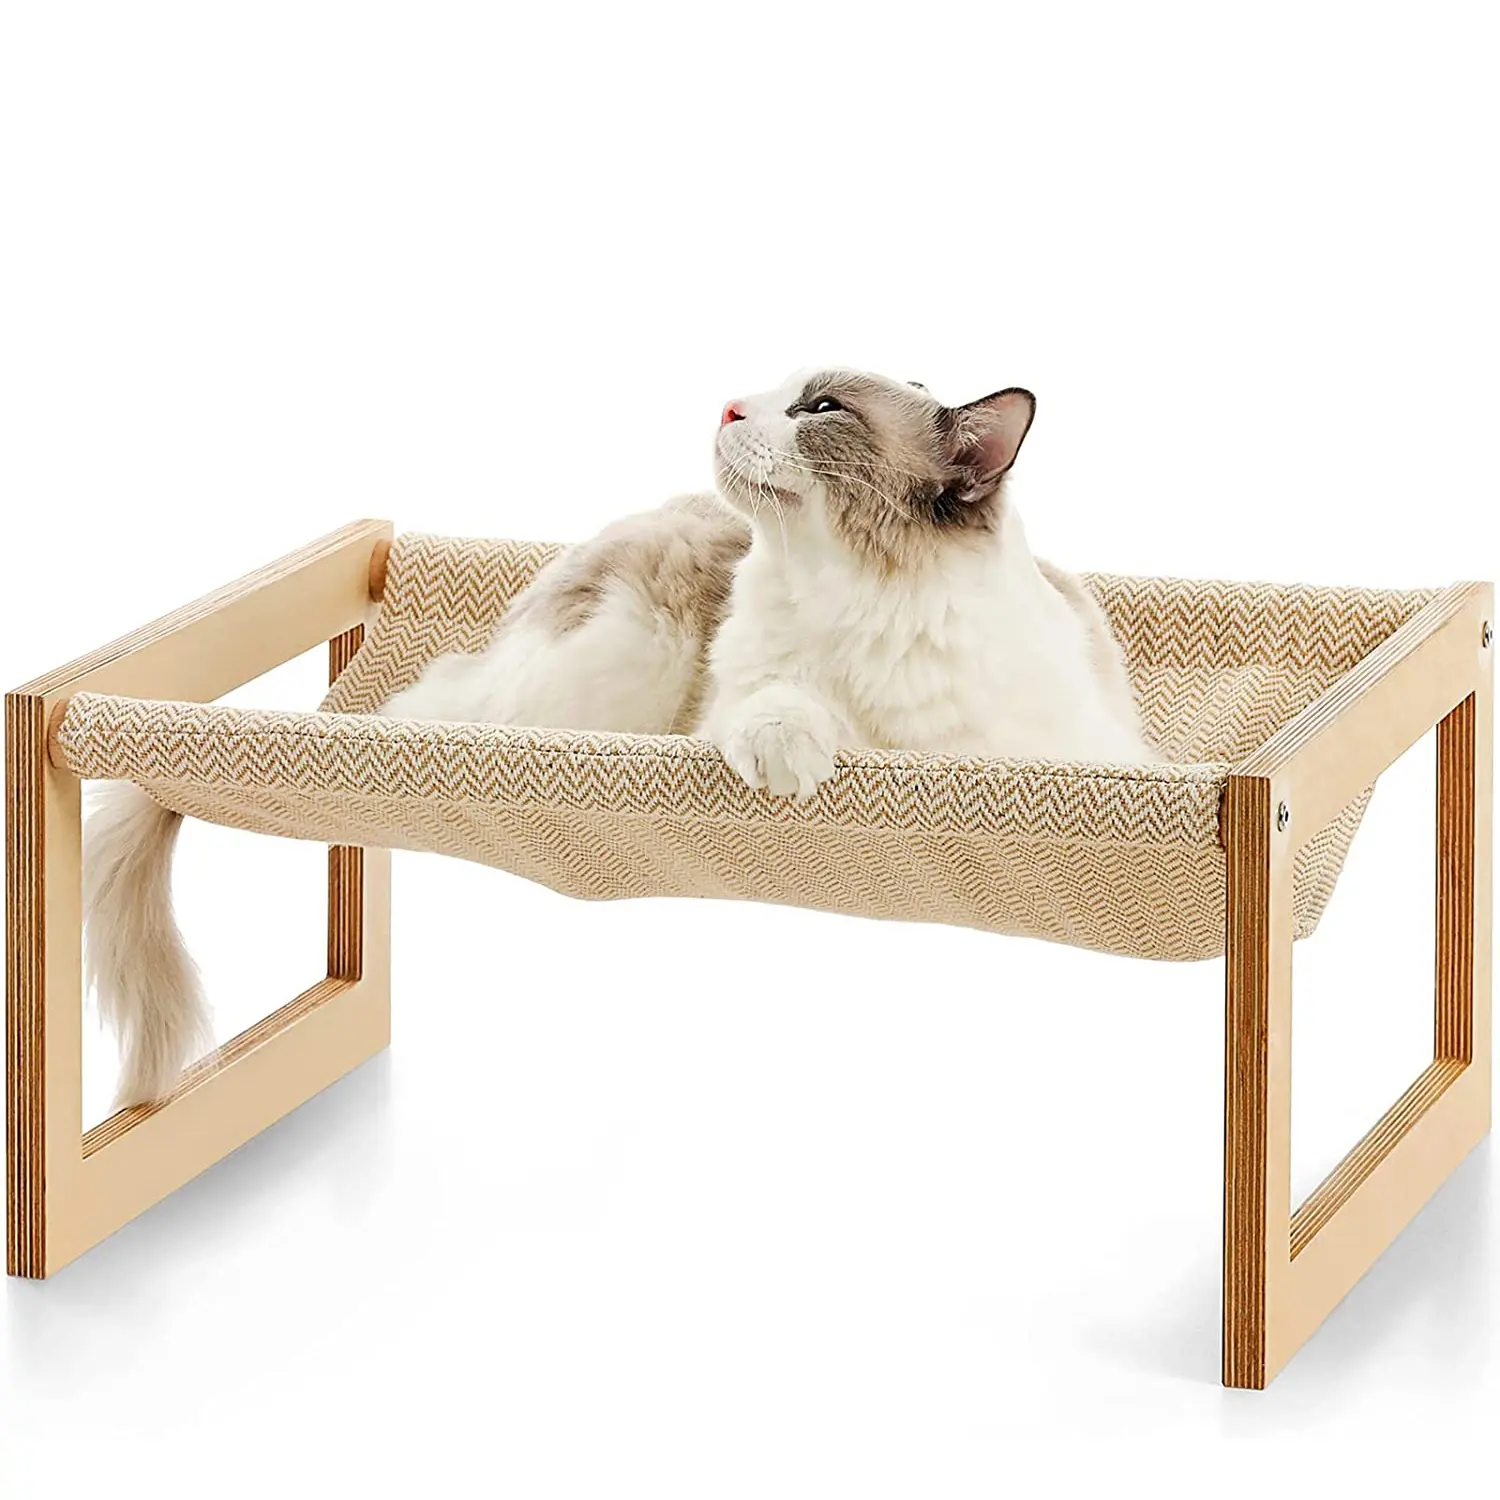 New Moon Cat Swing Chair Kitty Hammock Bed Cat Furniture Gift for Your Cat or Toy Dog